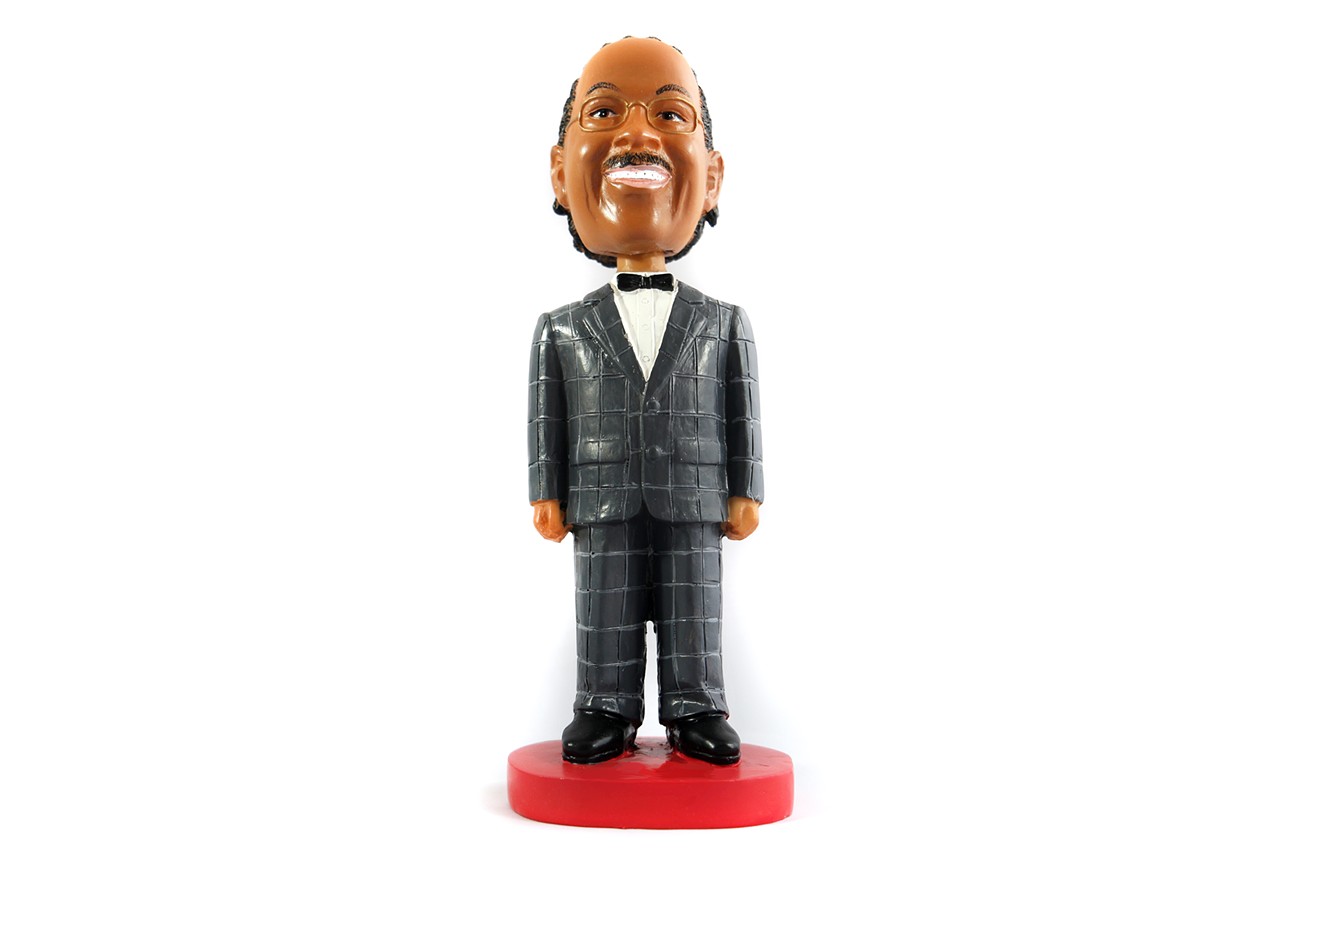 John Wiley Price's campaign sells a bobble-head figurine in his image.